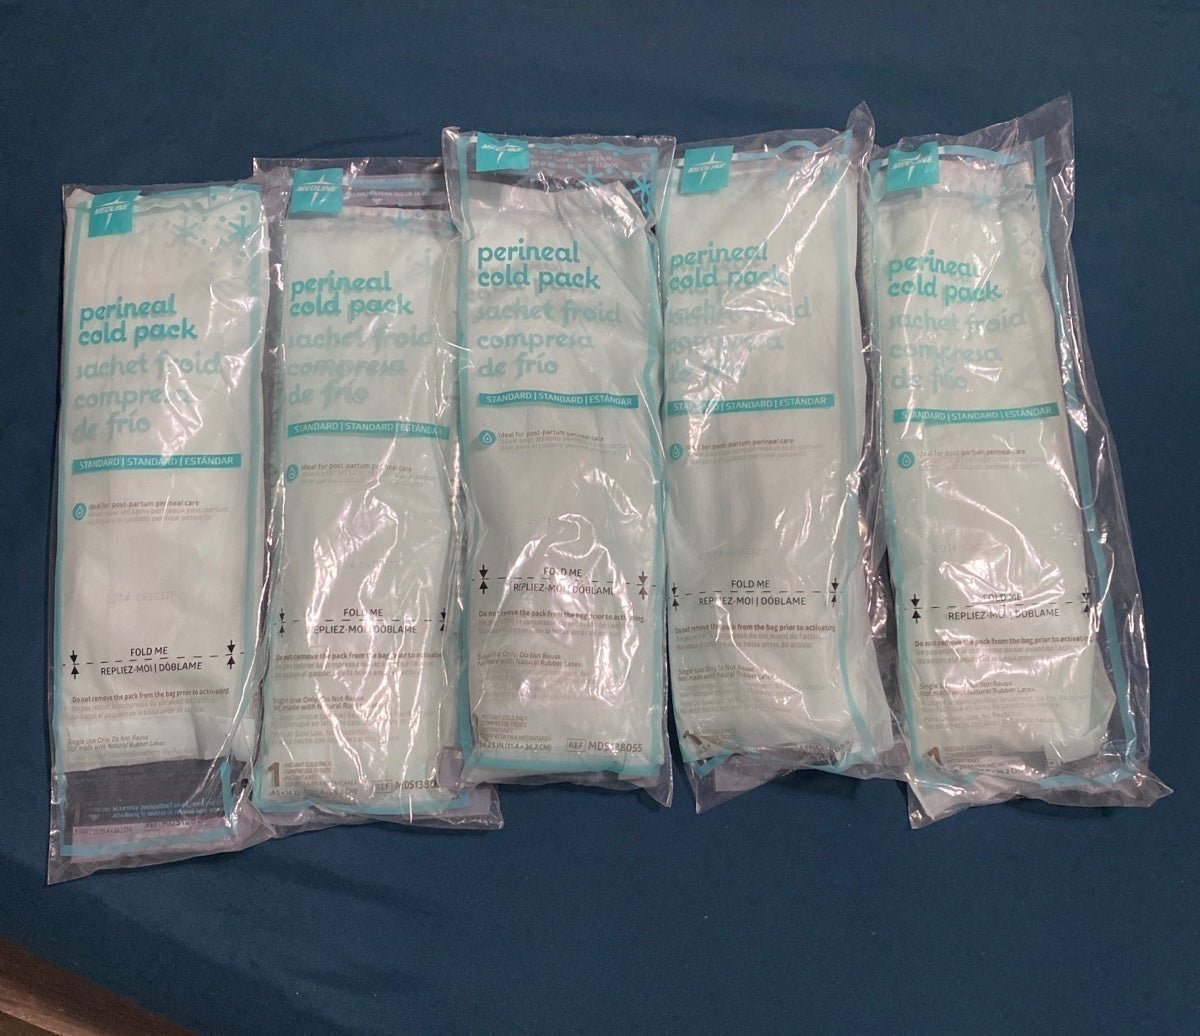 Perineal Cold pack for post partum care (pack of 5) gjZ4oIqws